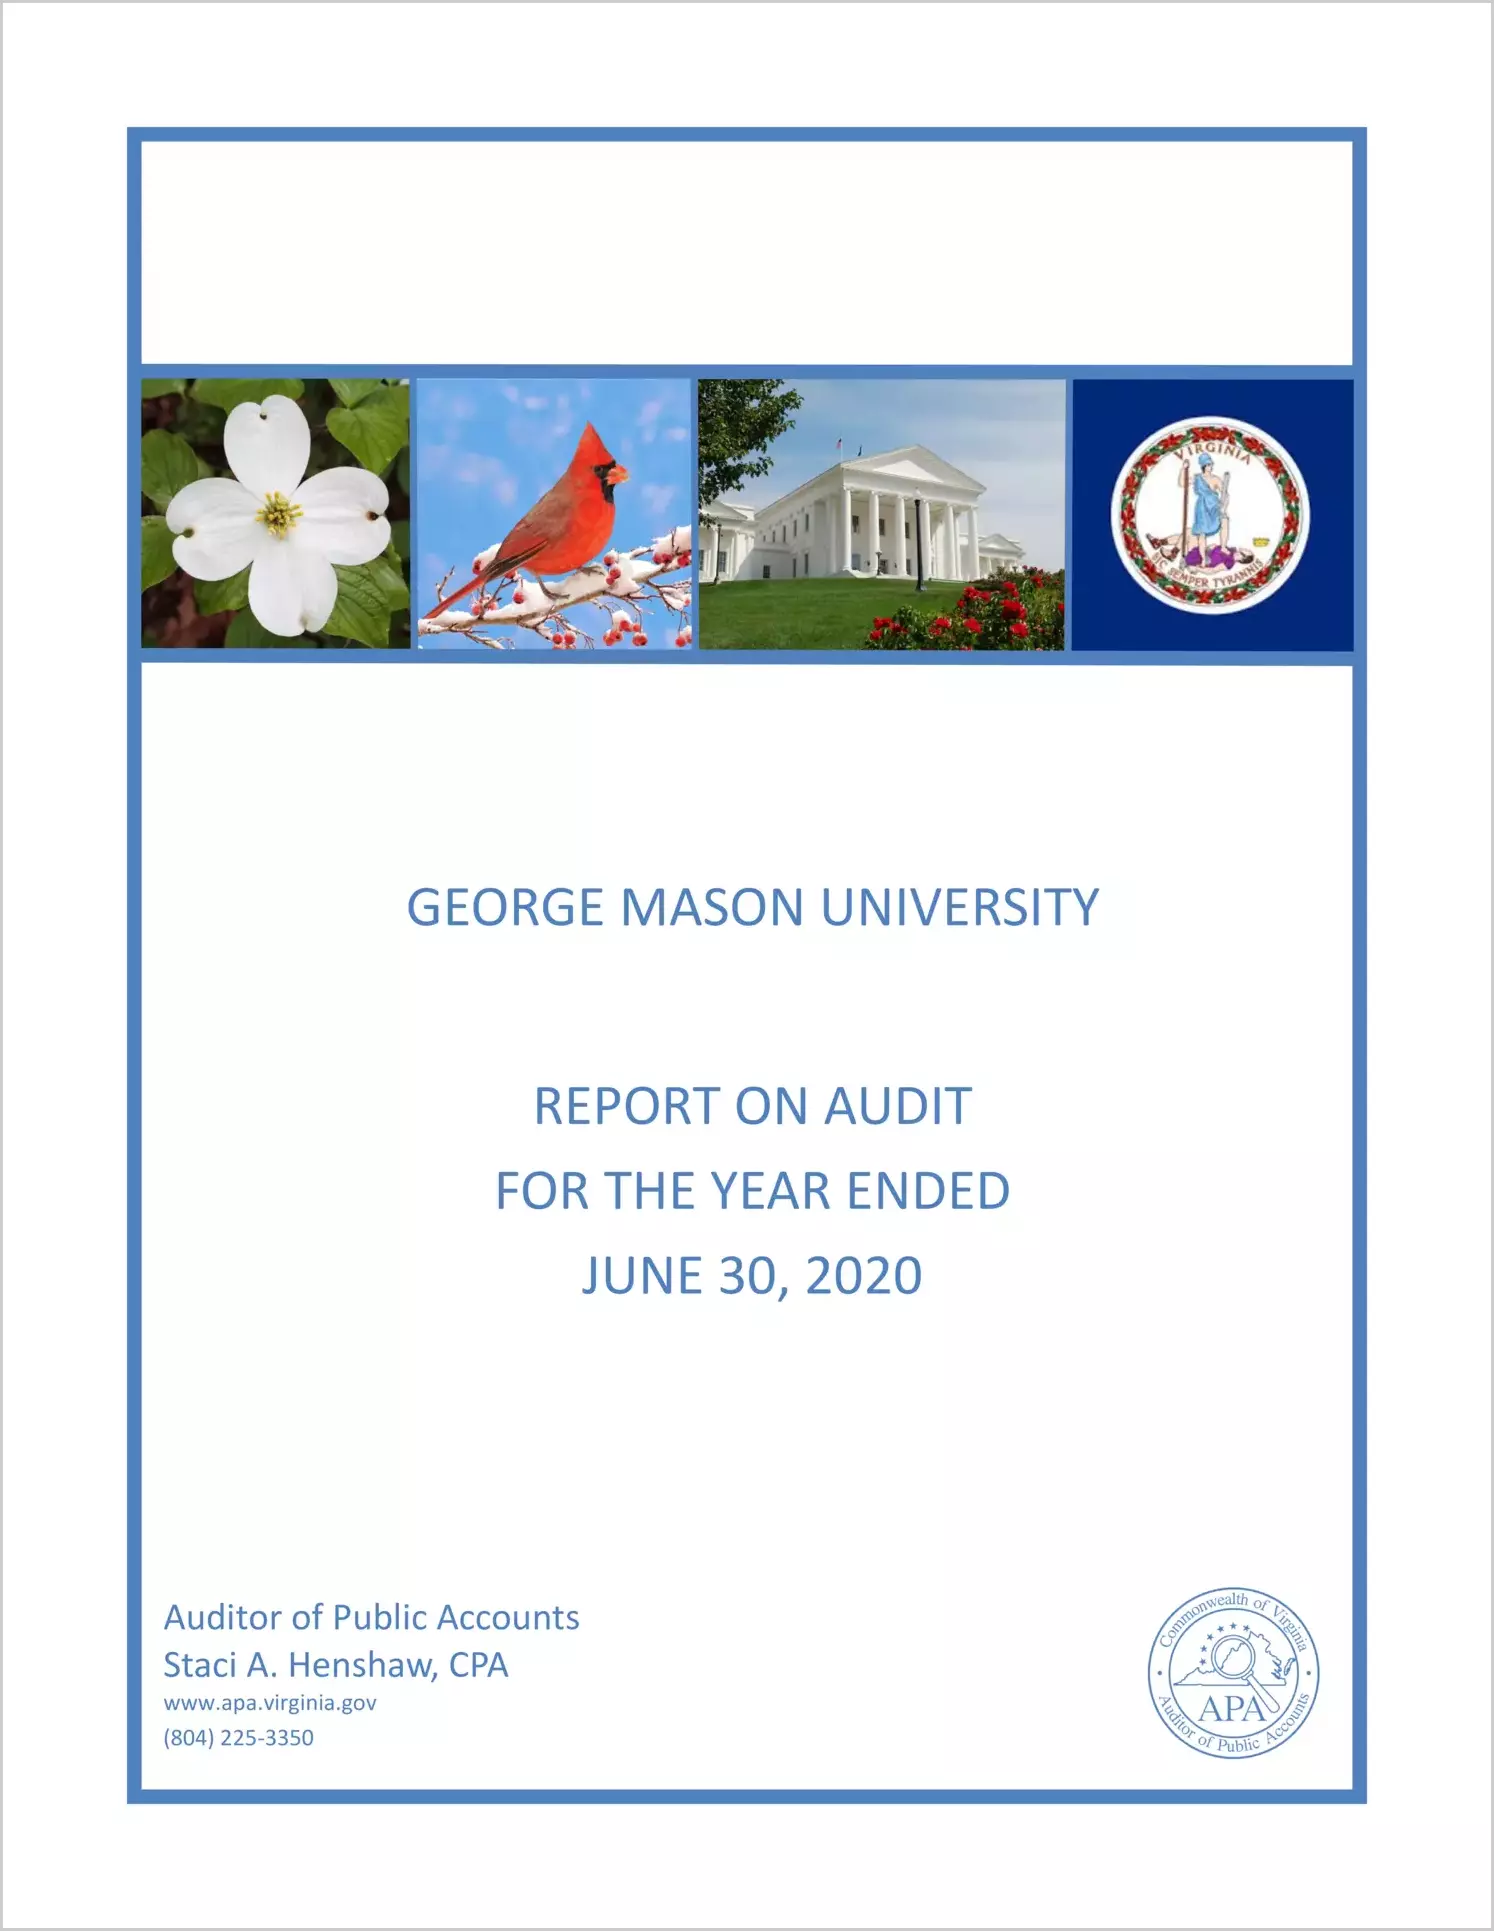 George Mason University for the year ended June 30, 2020